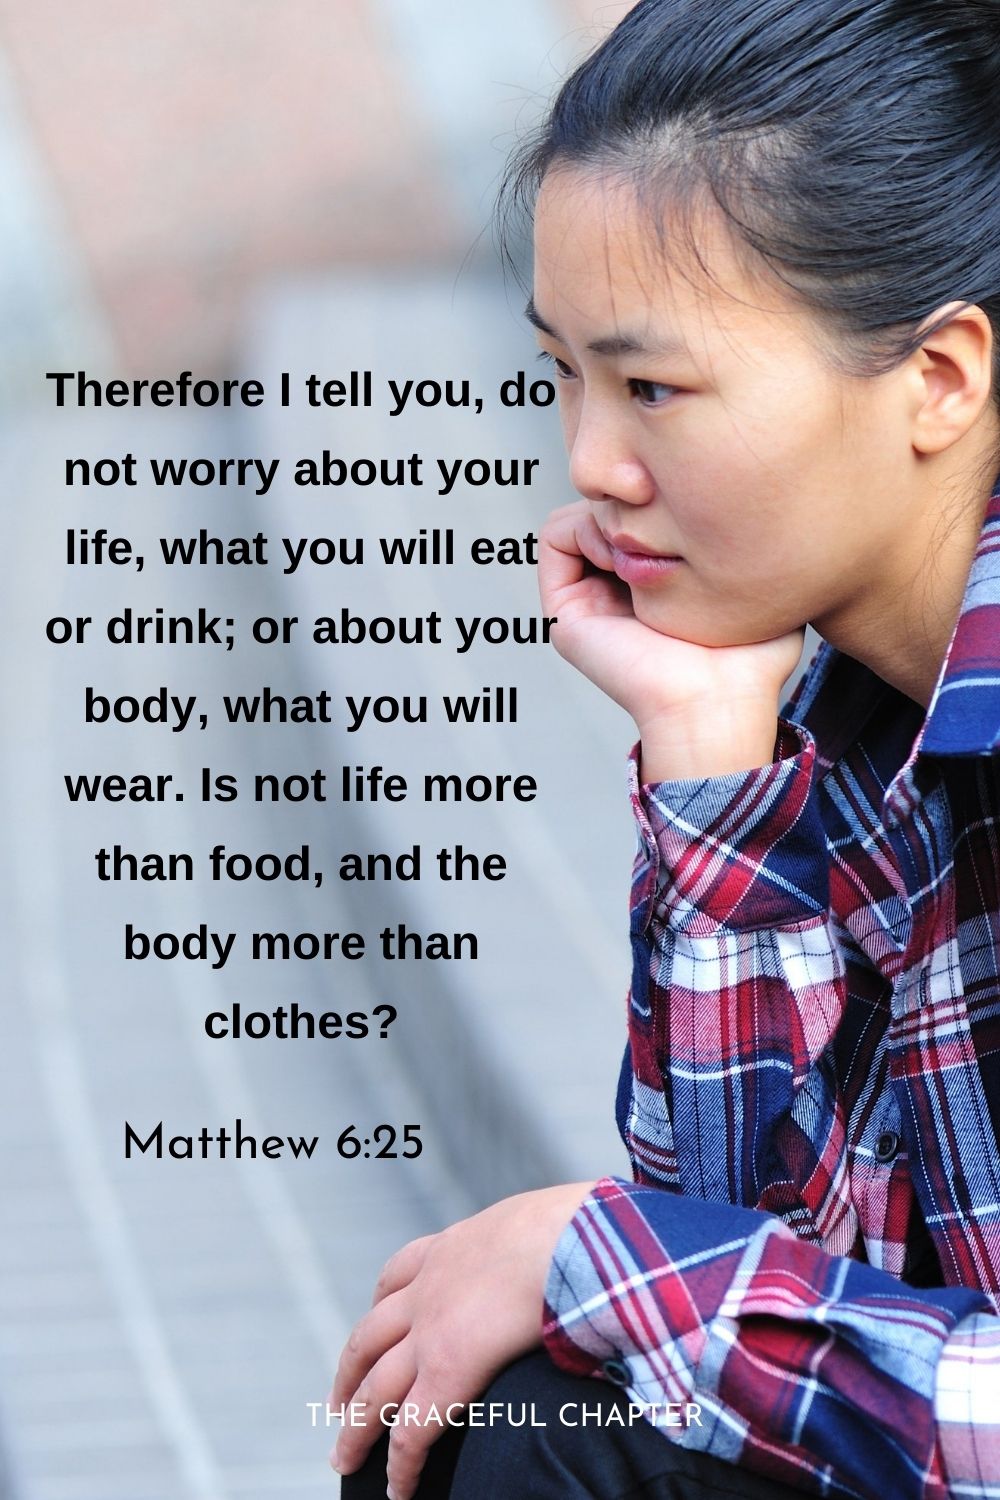 Therefore I tell you, do not worry about your life, what you will eat or drink; or about your body, what you will wear. Is not life more than food, and the body more than clothes?